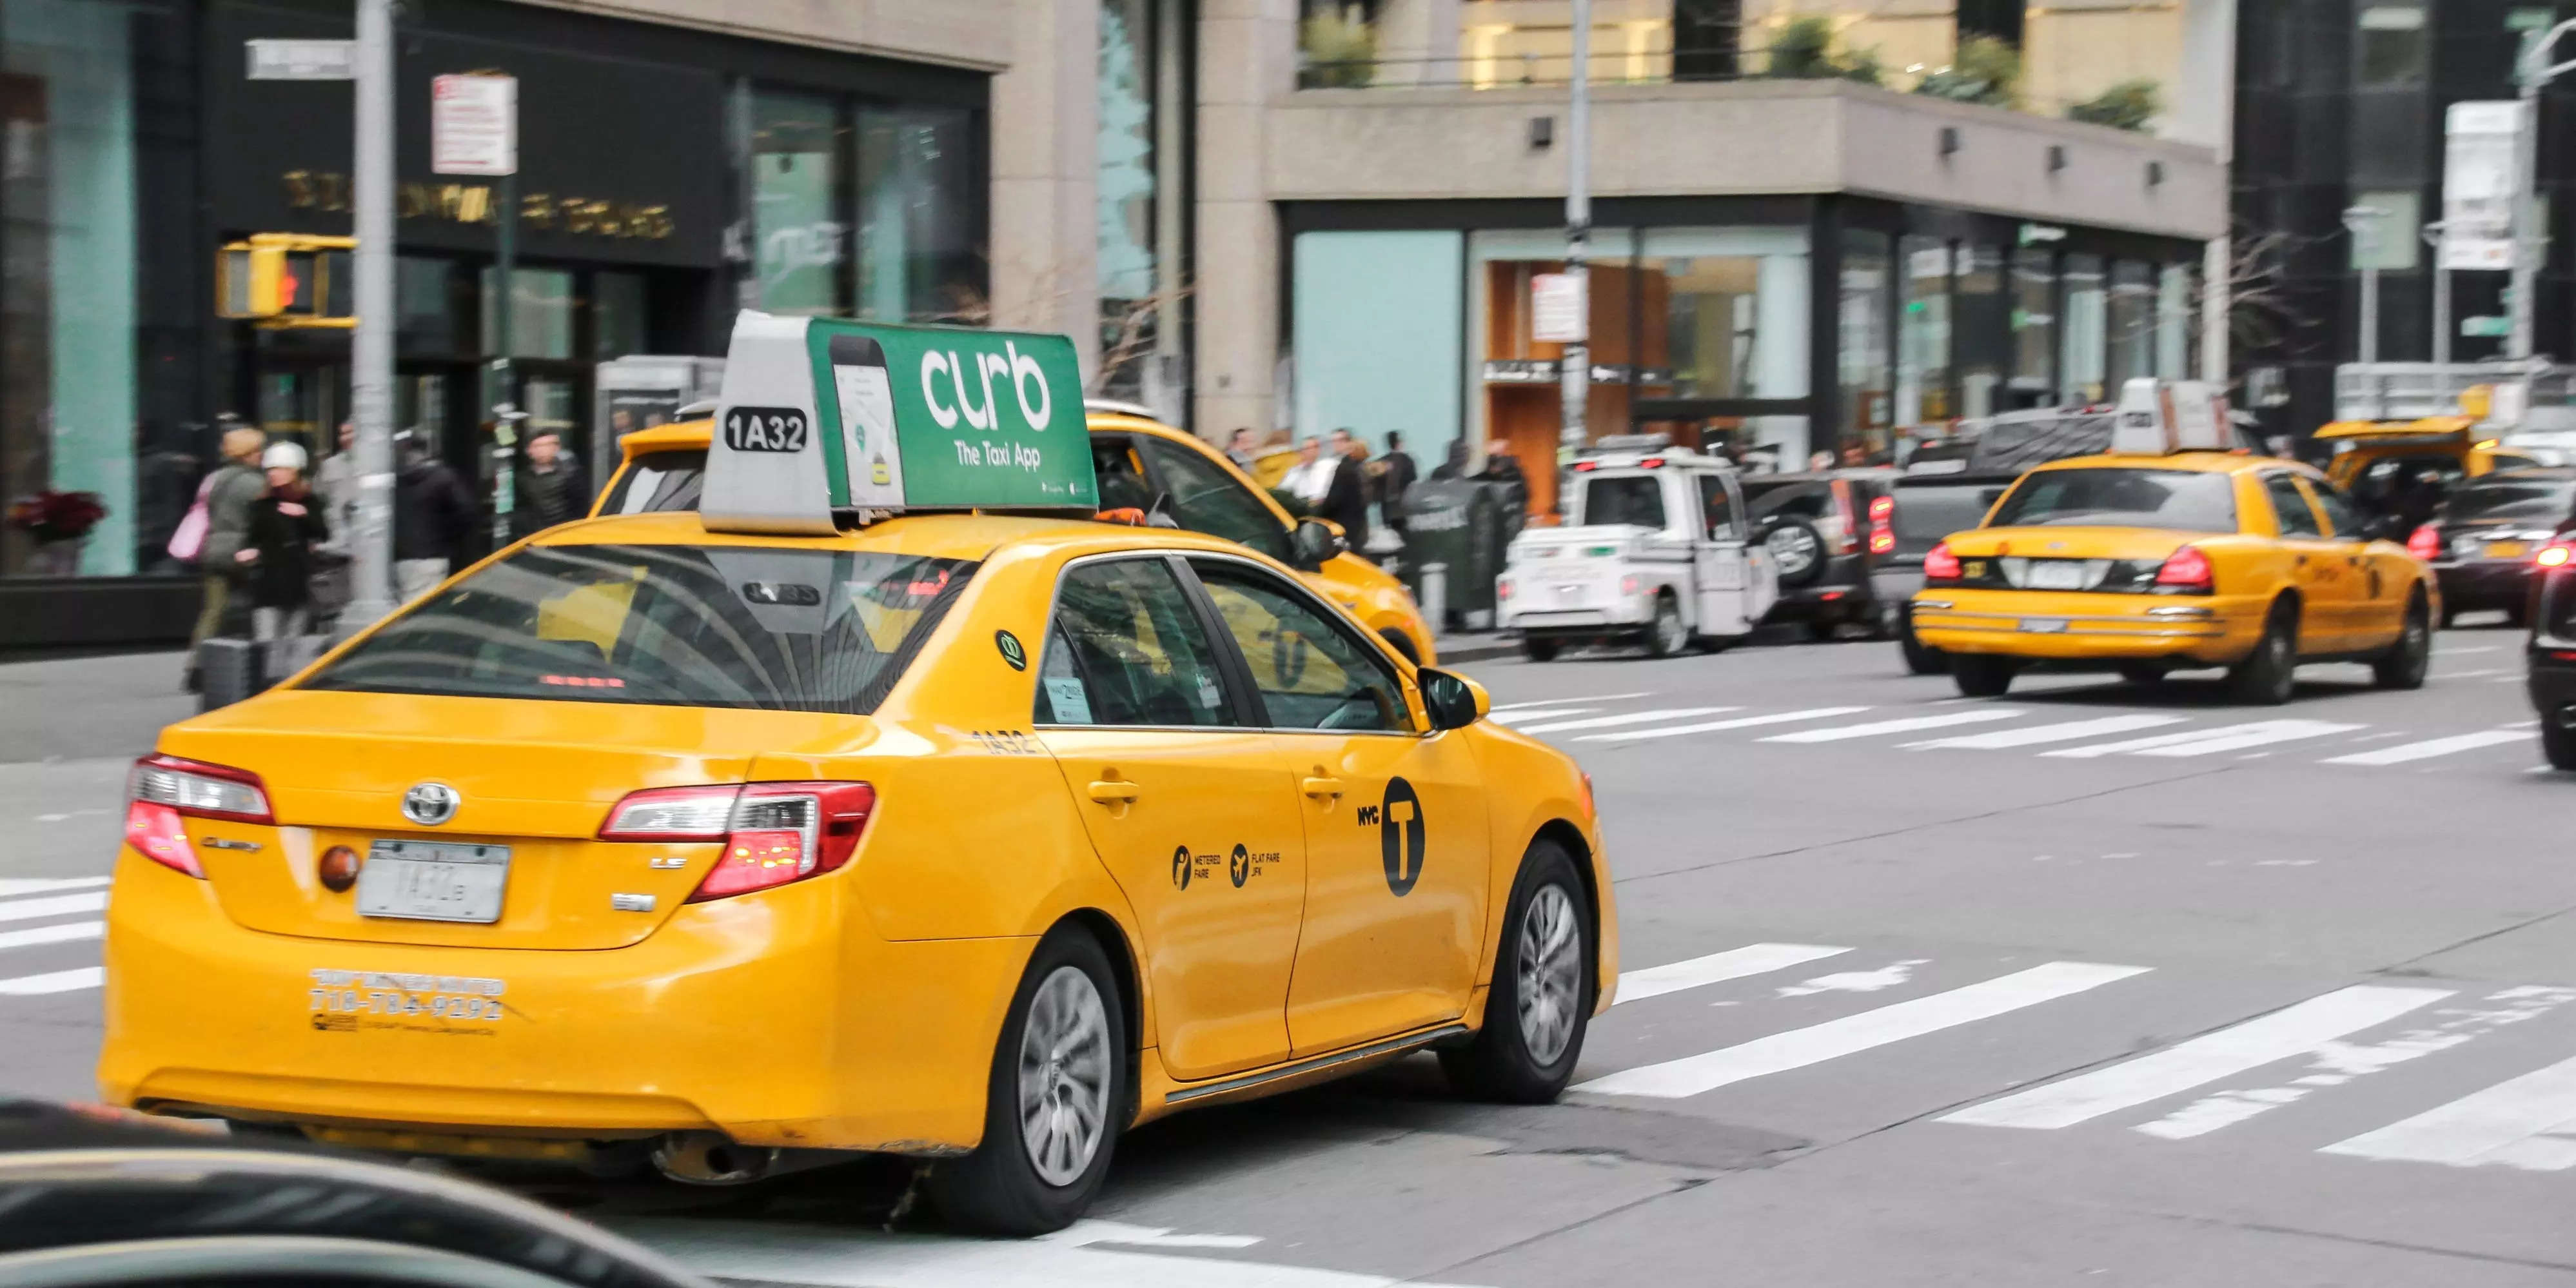 
An NYC taxi-medallion company plunges 59% after the SEC alleges illegal stock promotion
